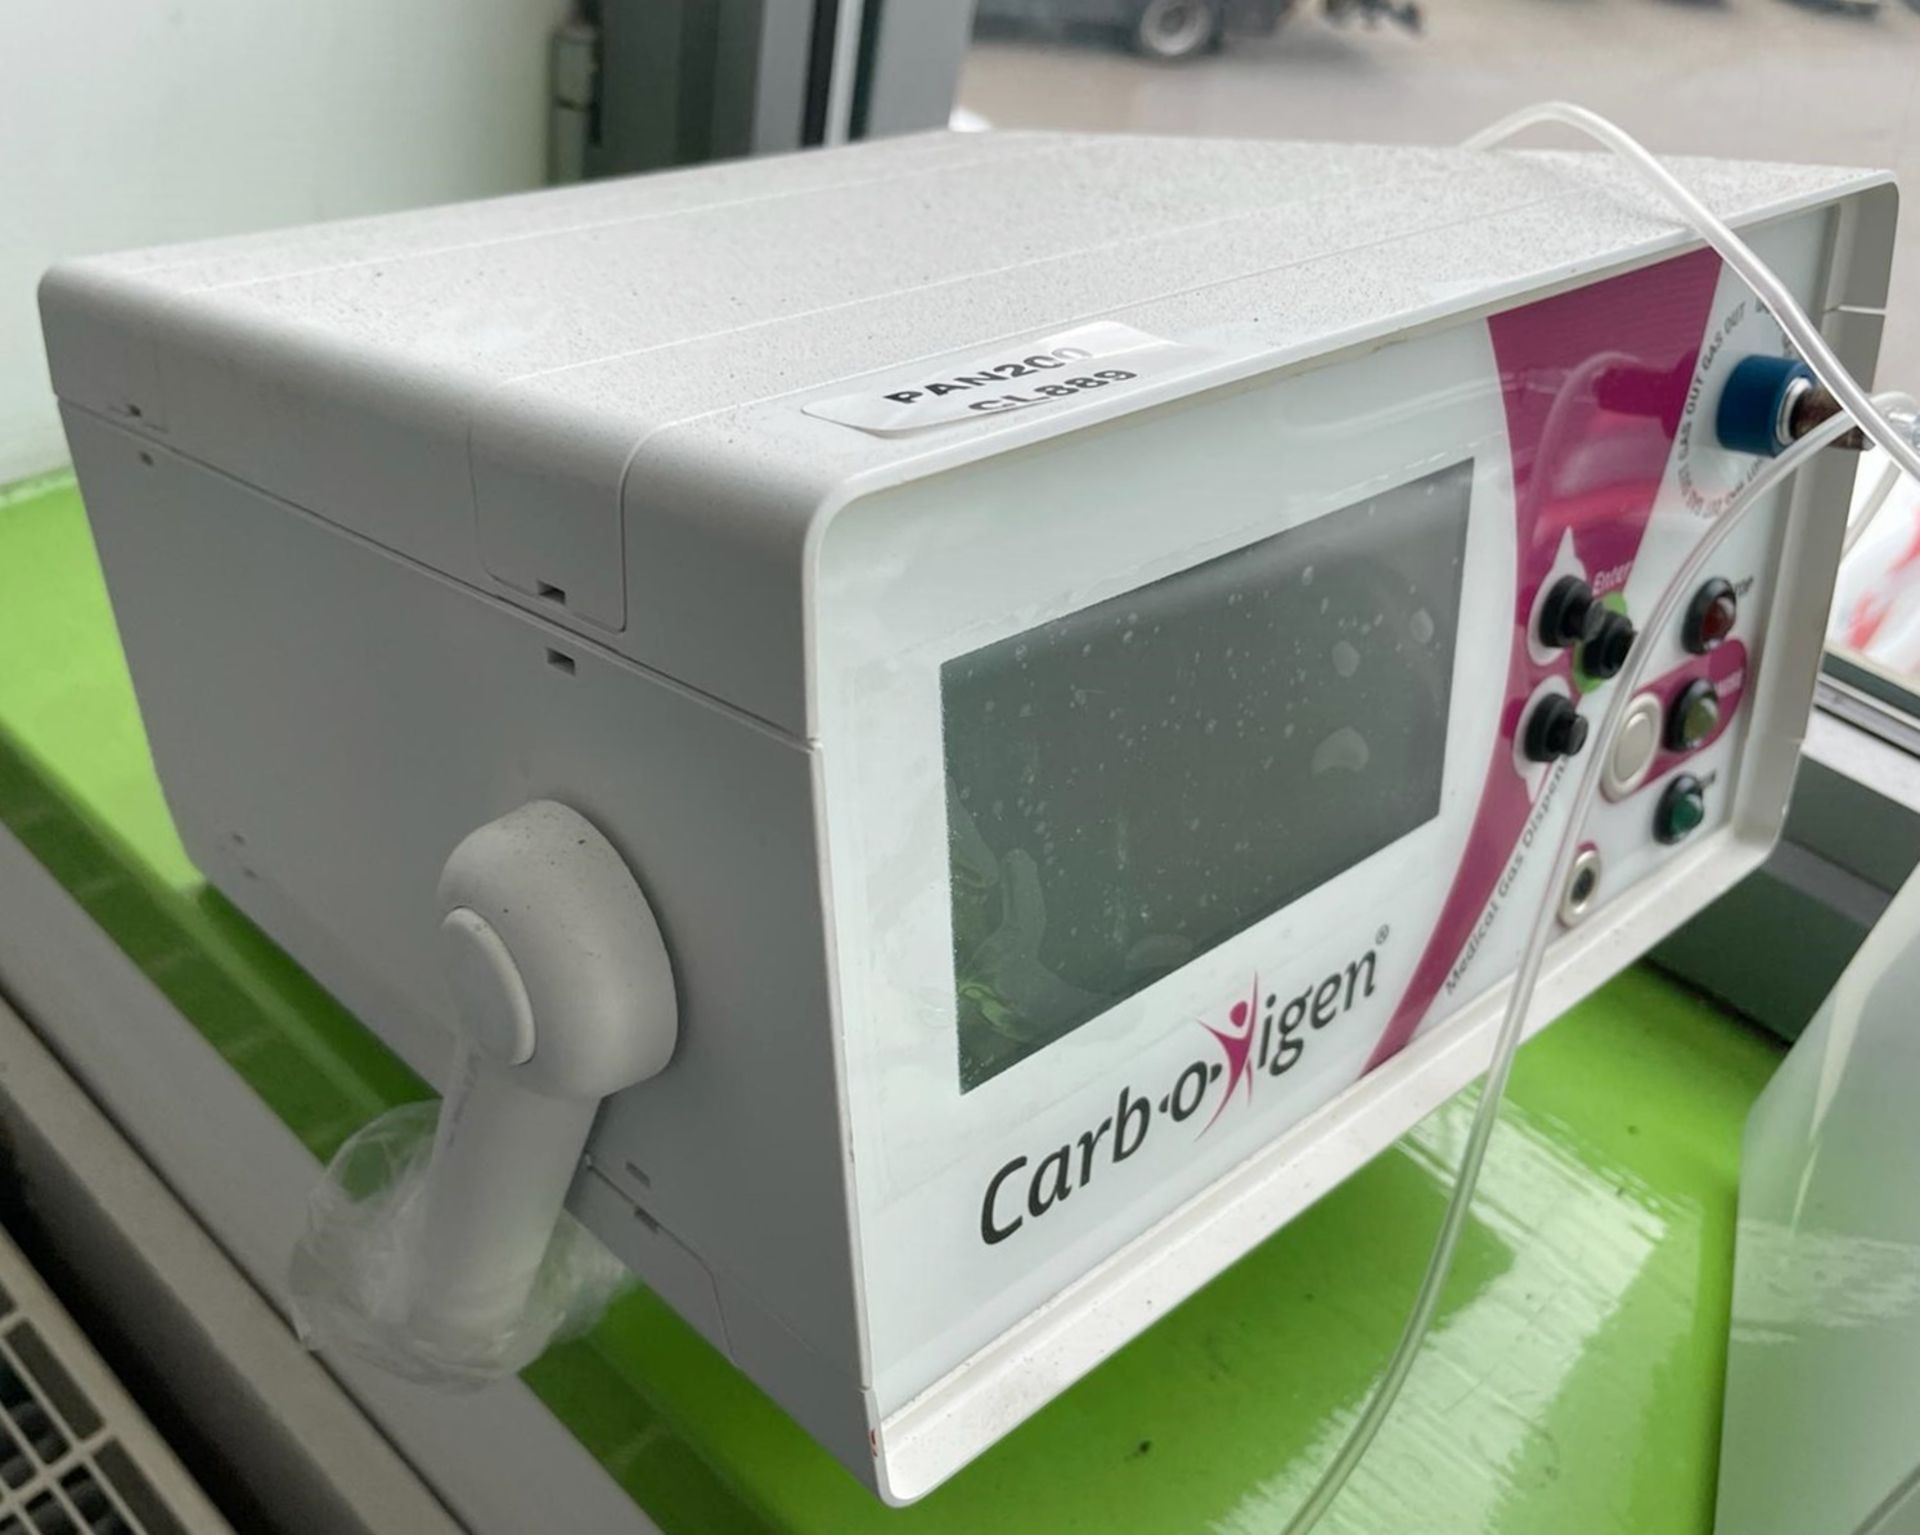 1 x Carb-O-Xygen Table Carboxytherapy Medical Gas Dispenser - For The Sterile and Personalized - Image 3 of 6